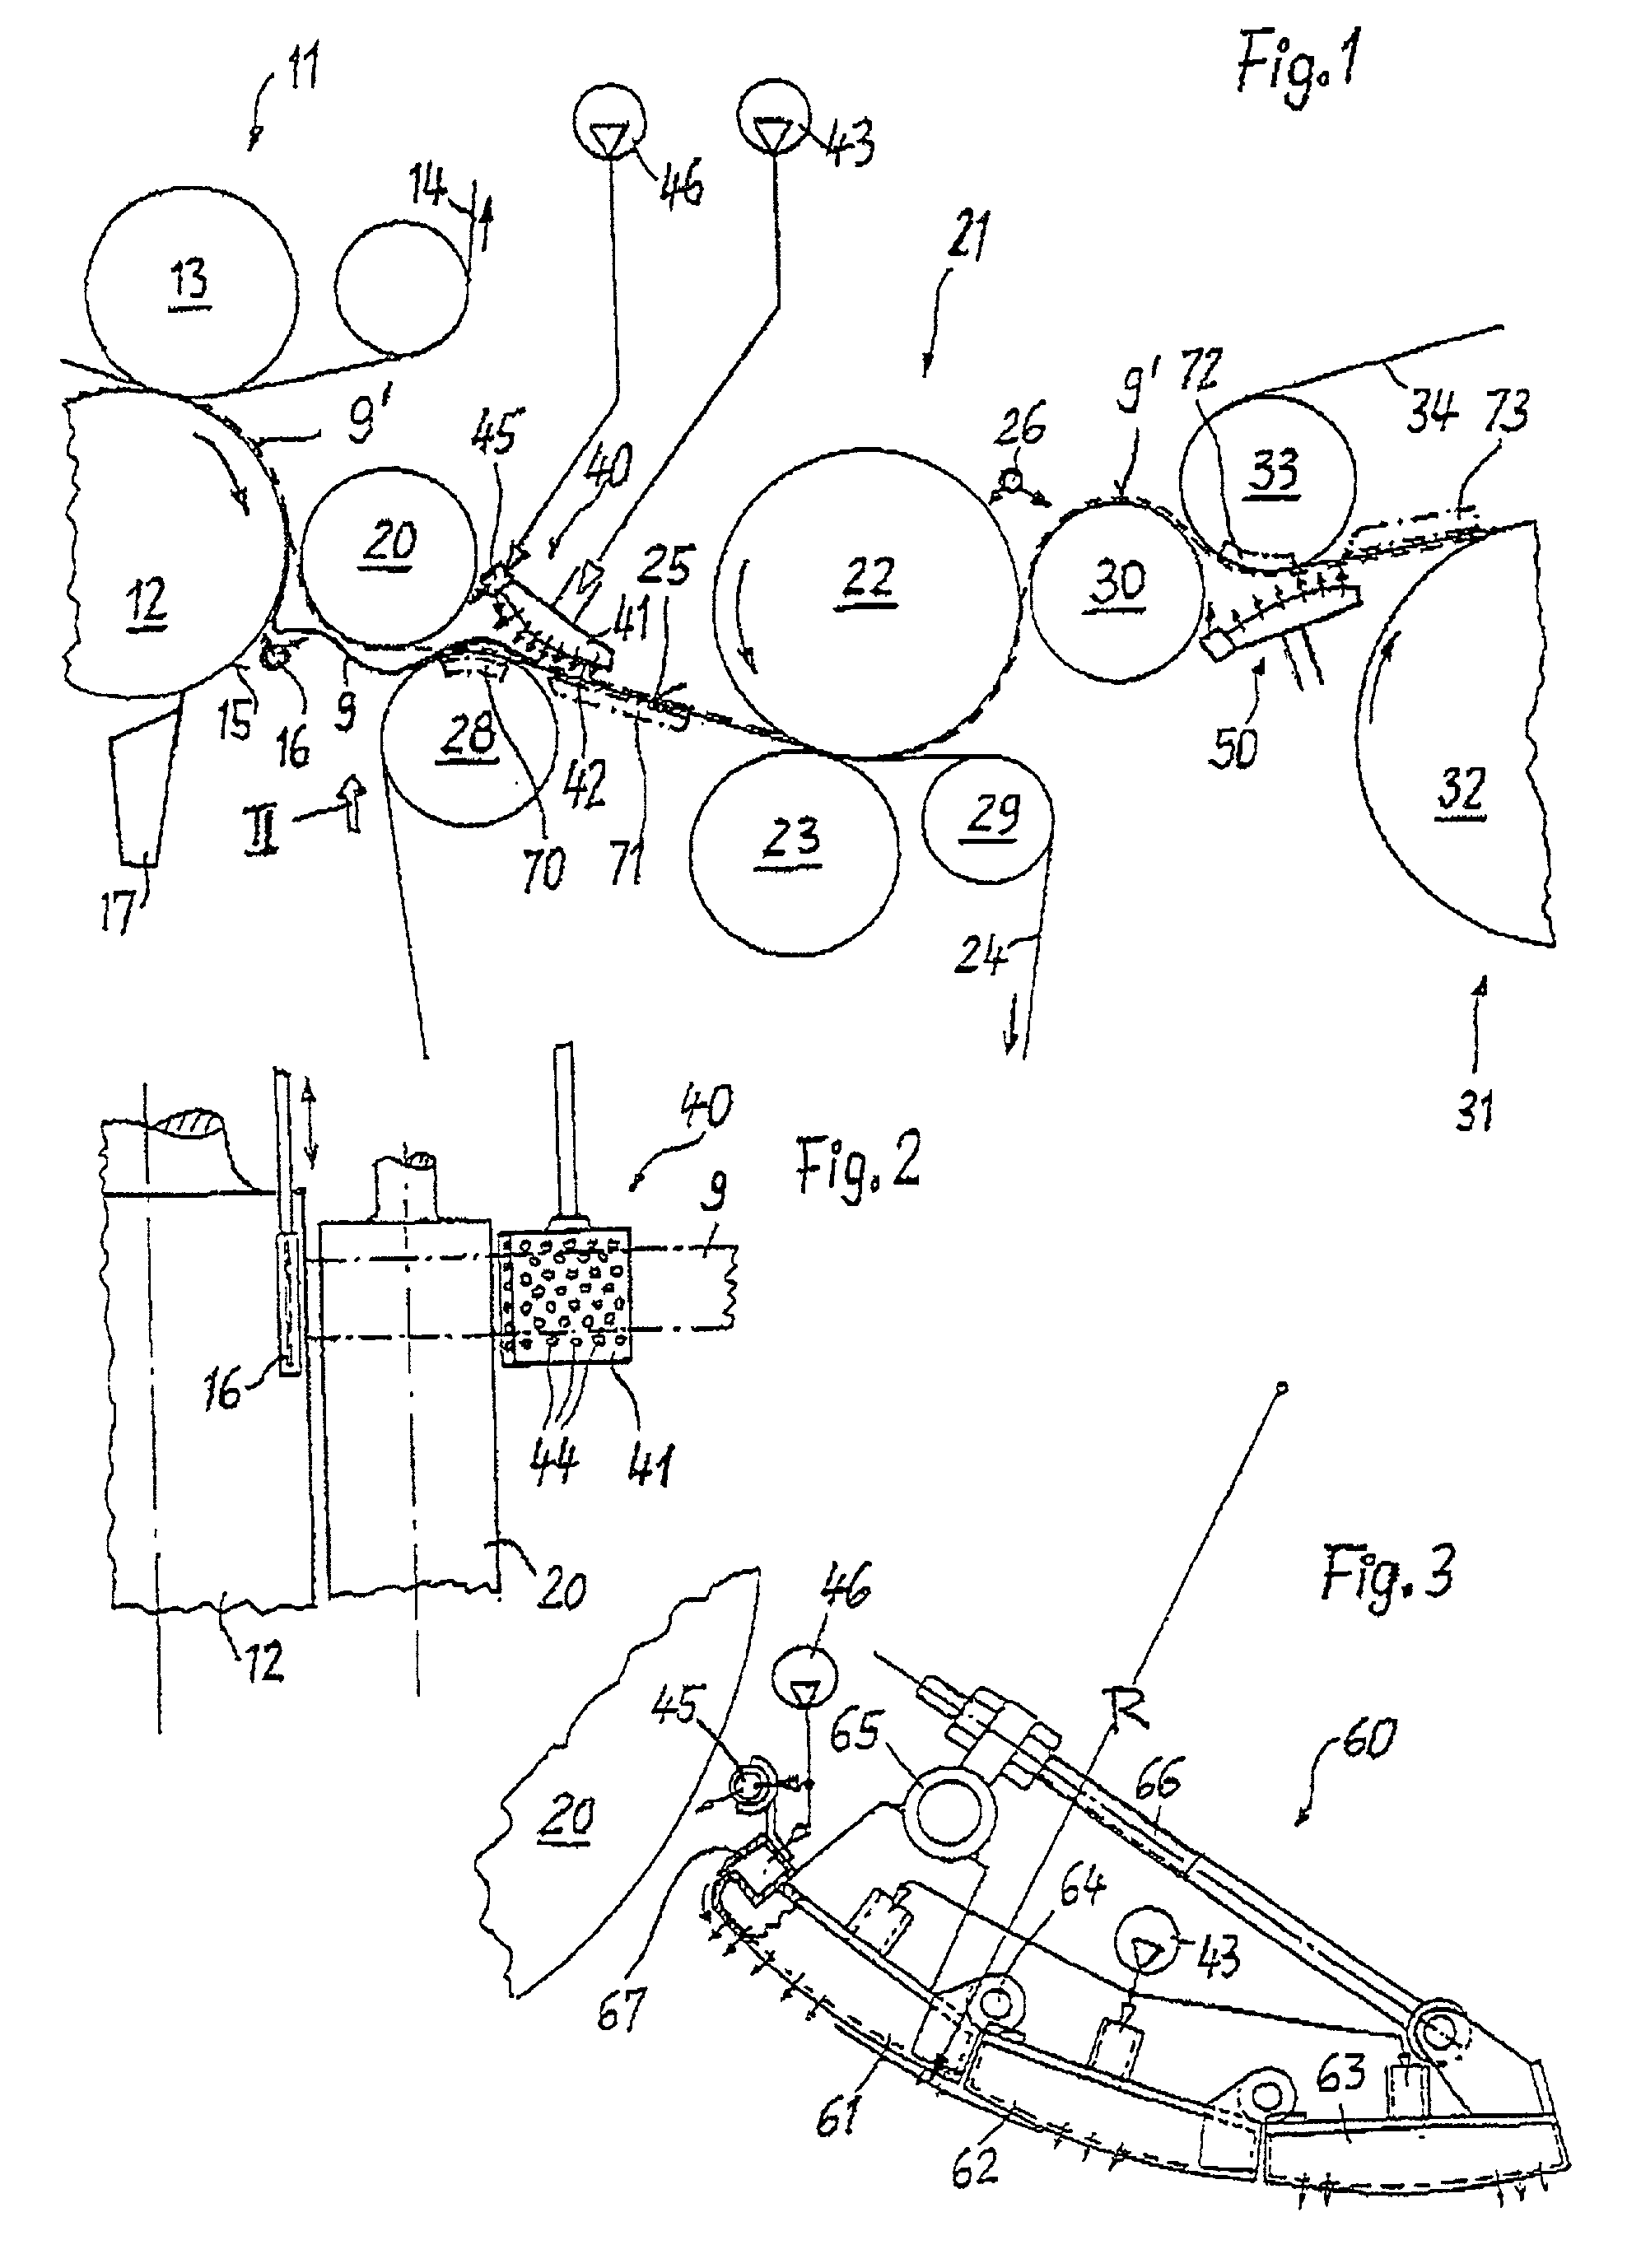 Apparatus for the transfer of a lead strip of a paper web